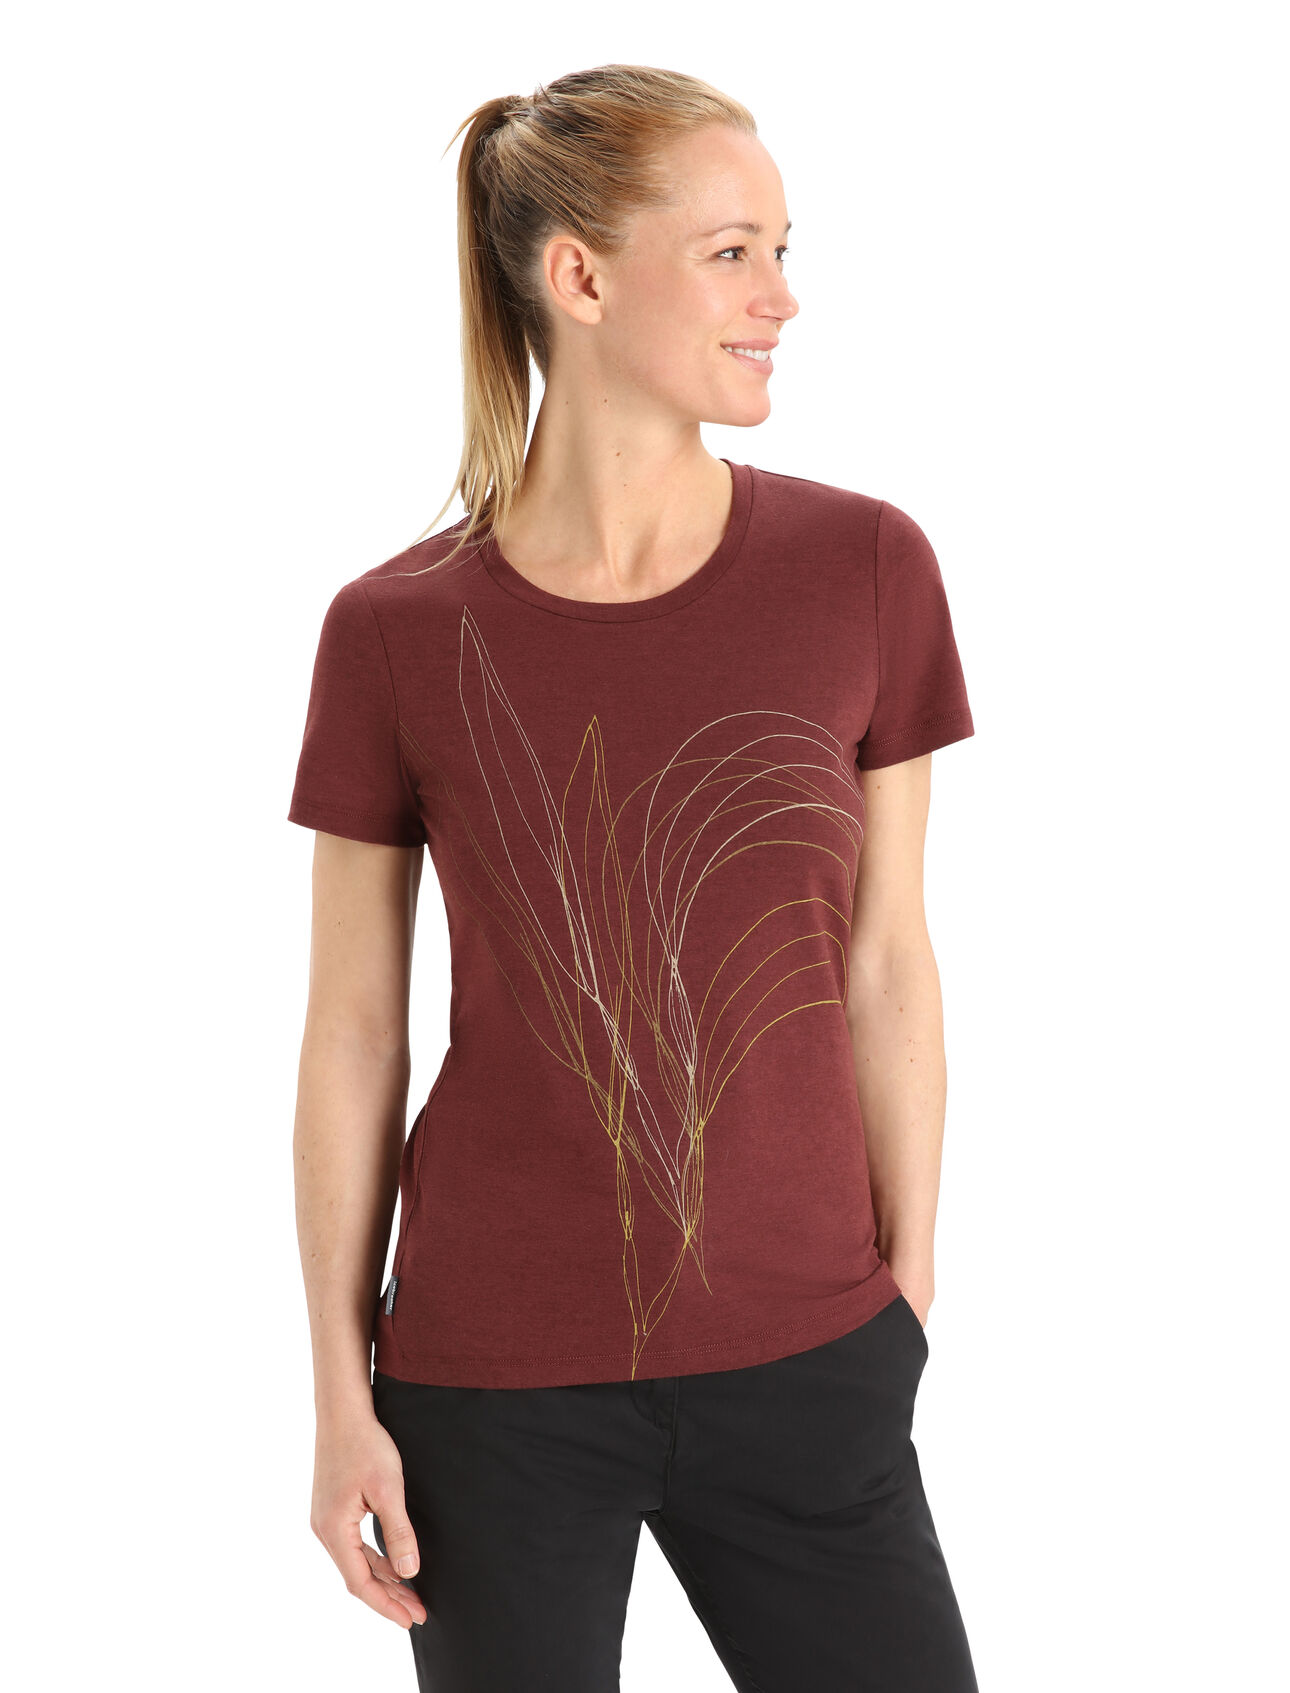 Womens Merino Central Classic Short Sleeve T-Shirt Leaf A versatile, everyday tee that goes anywhere in comfort, the Central Classic Short Sleeve Tee Leaf features a sustainable blend of natural merino wool and soft organic cotton. The original graphic artwork features a unique floral line drawing.